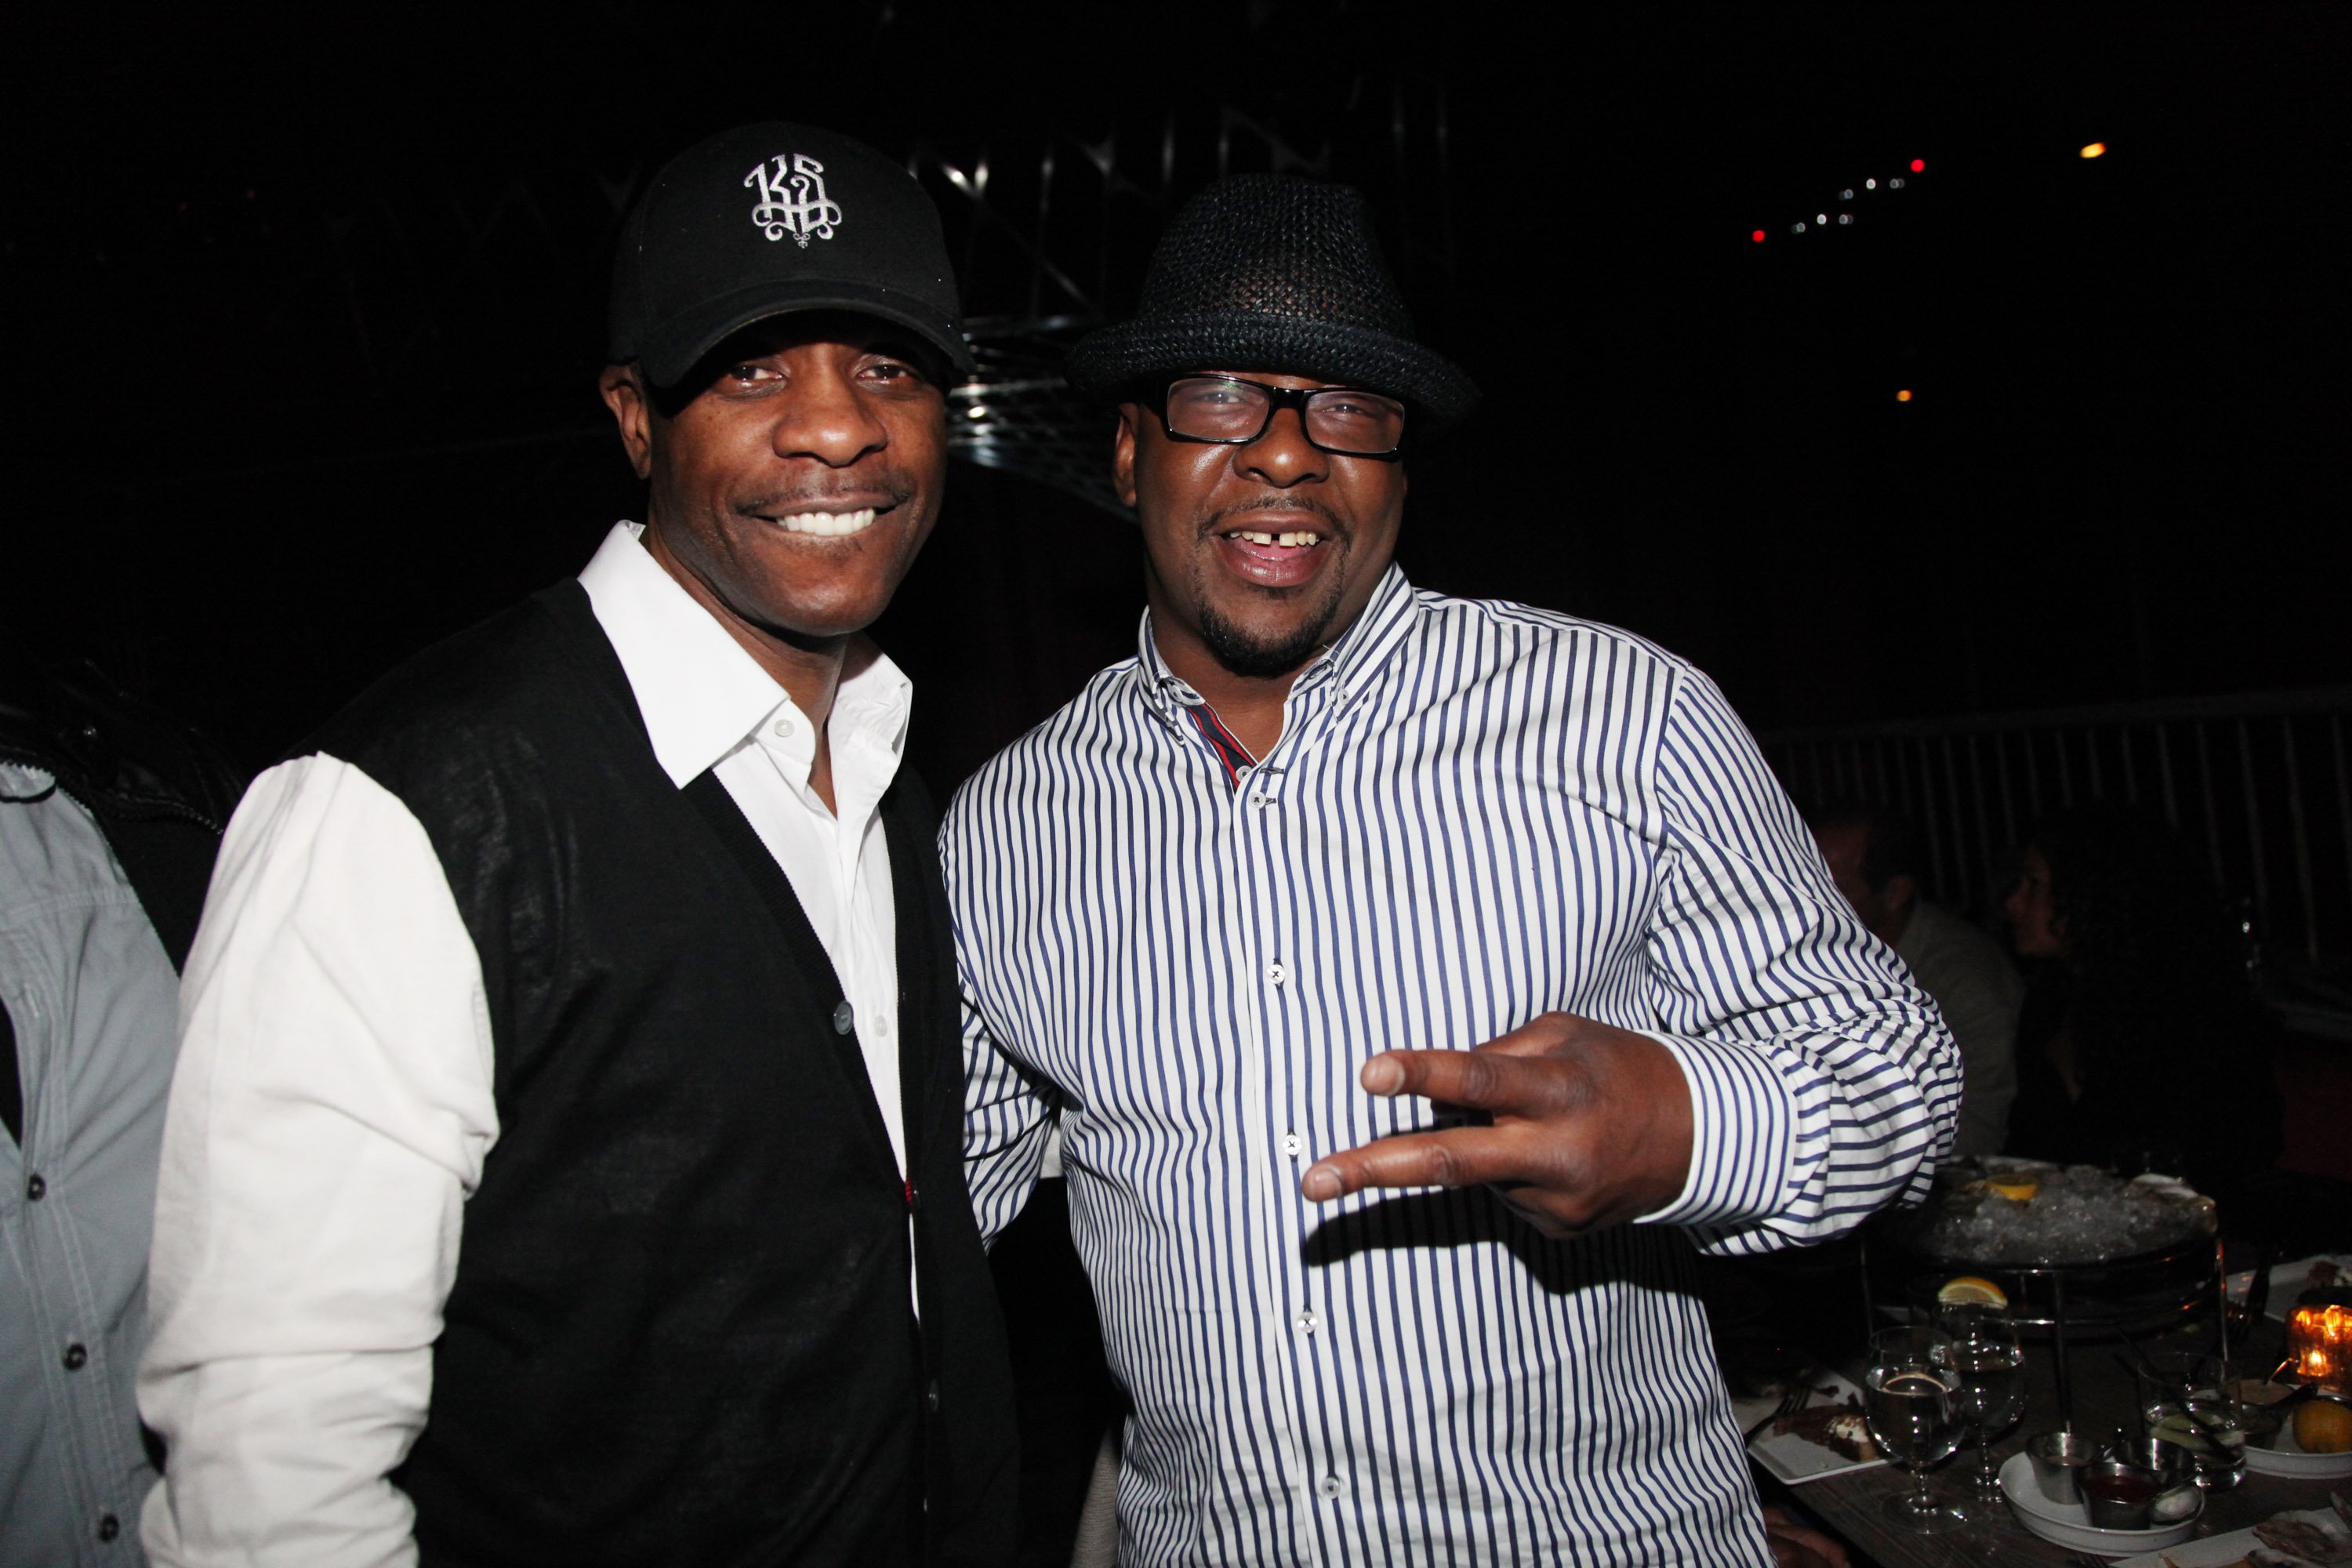 Keith Sweat and Bobby Brown pose for a photo together at a dinner in New York City